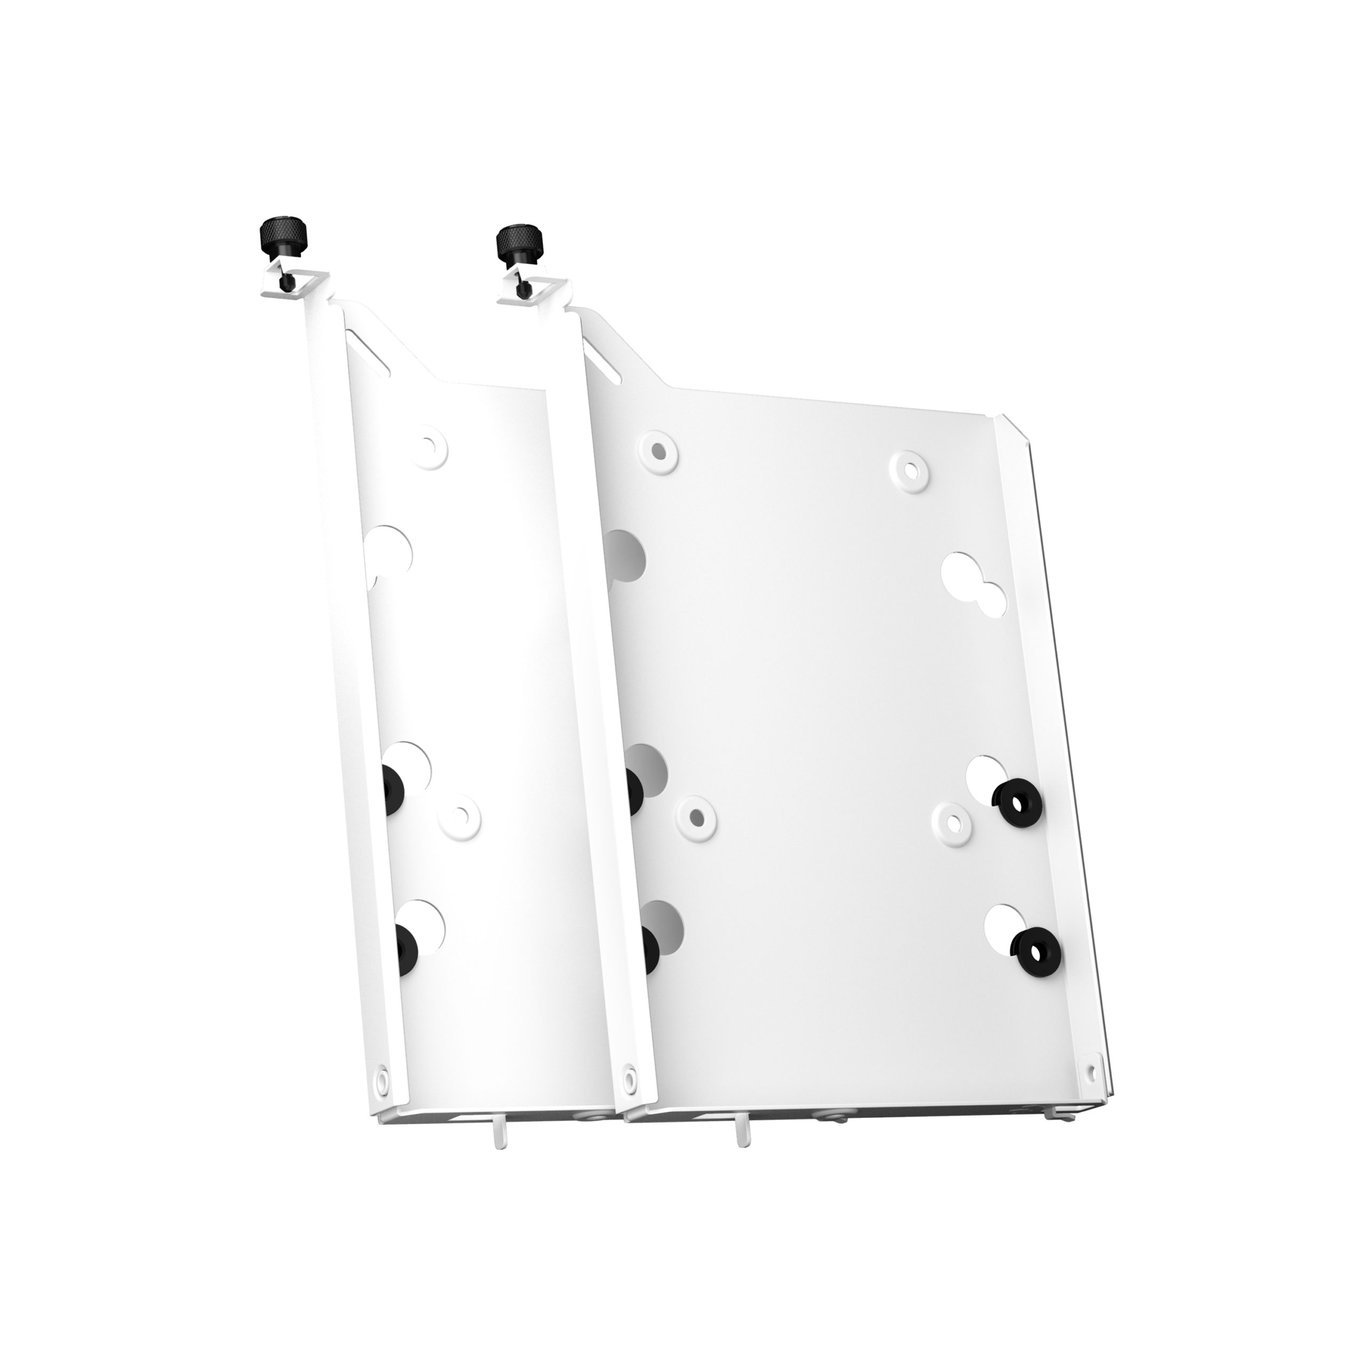 Fractal Design HDD Tray kit Type-B for Define 7 or Meshify 2 - White 白色 Dual pack